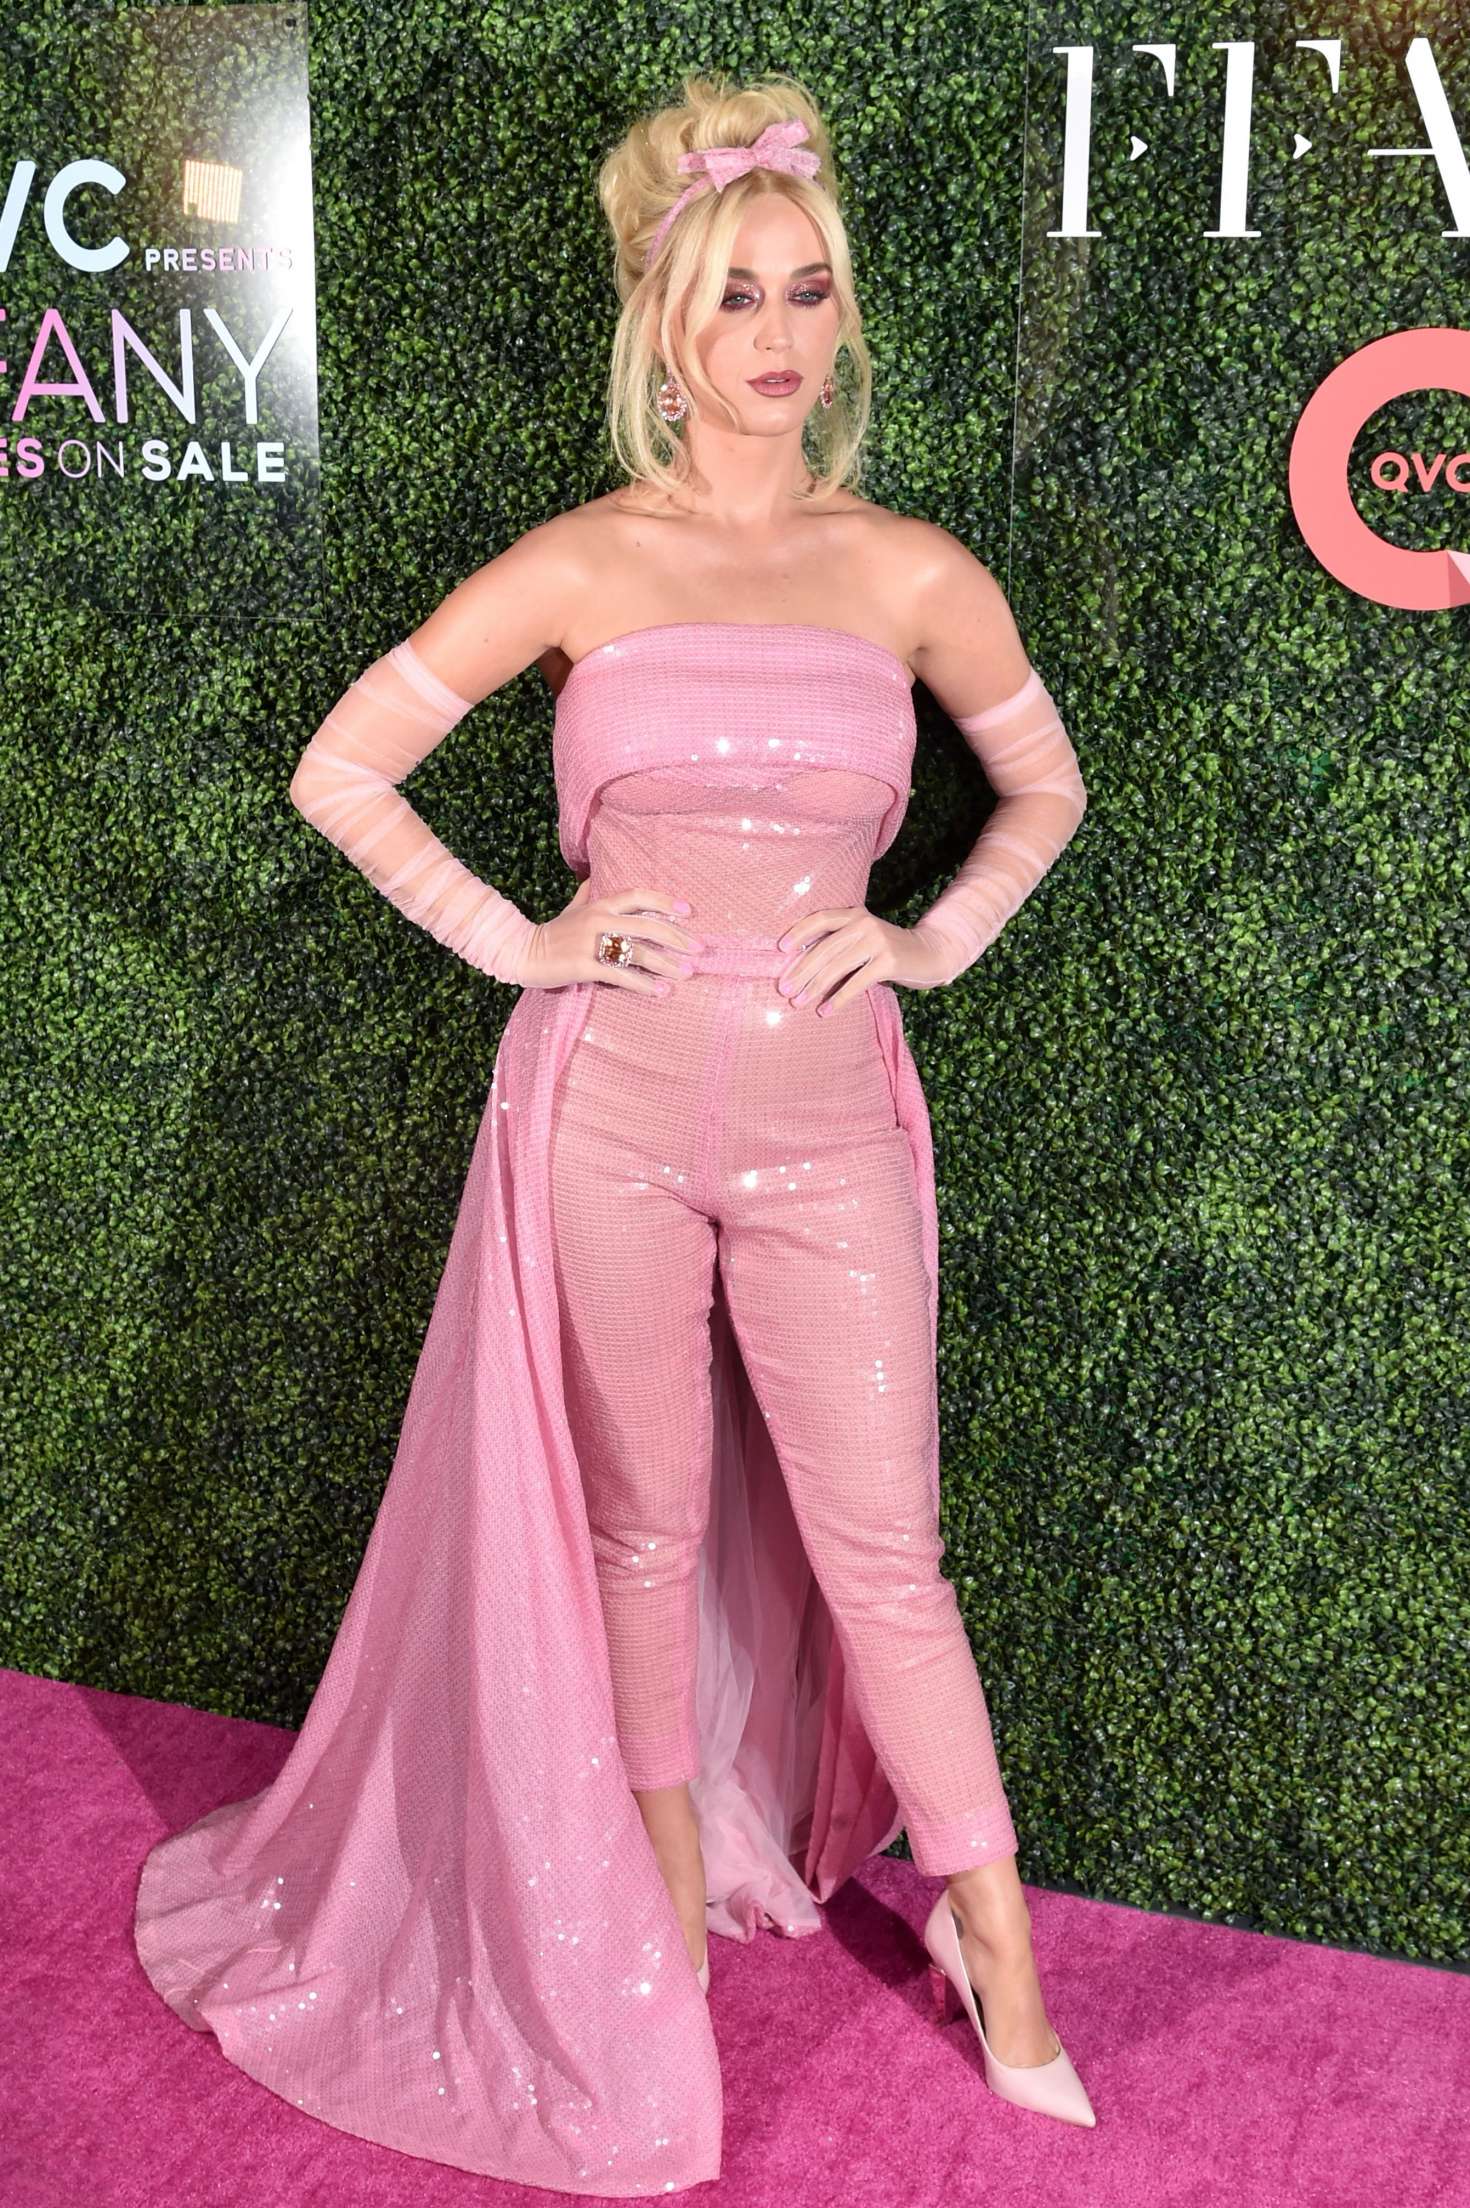 Katy Perry â€“ QVC Presents FFANY â€˜Shoes On Sale Galaâ€™ in New York